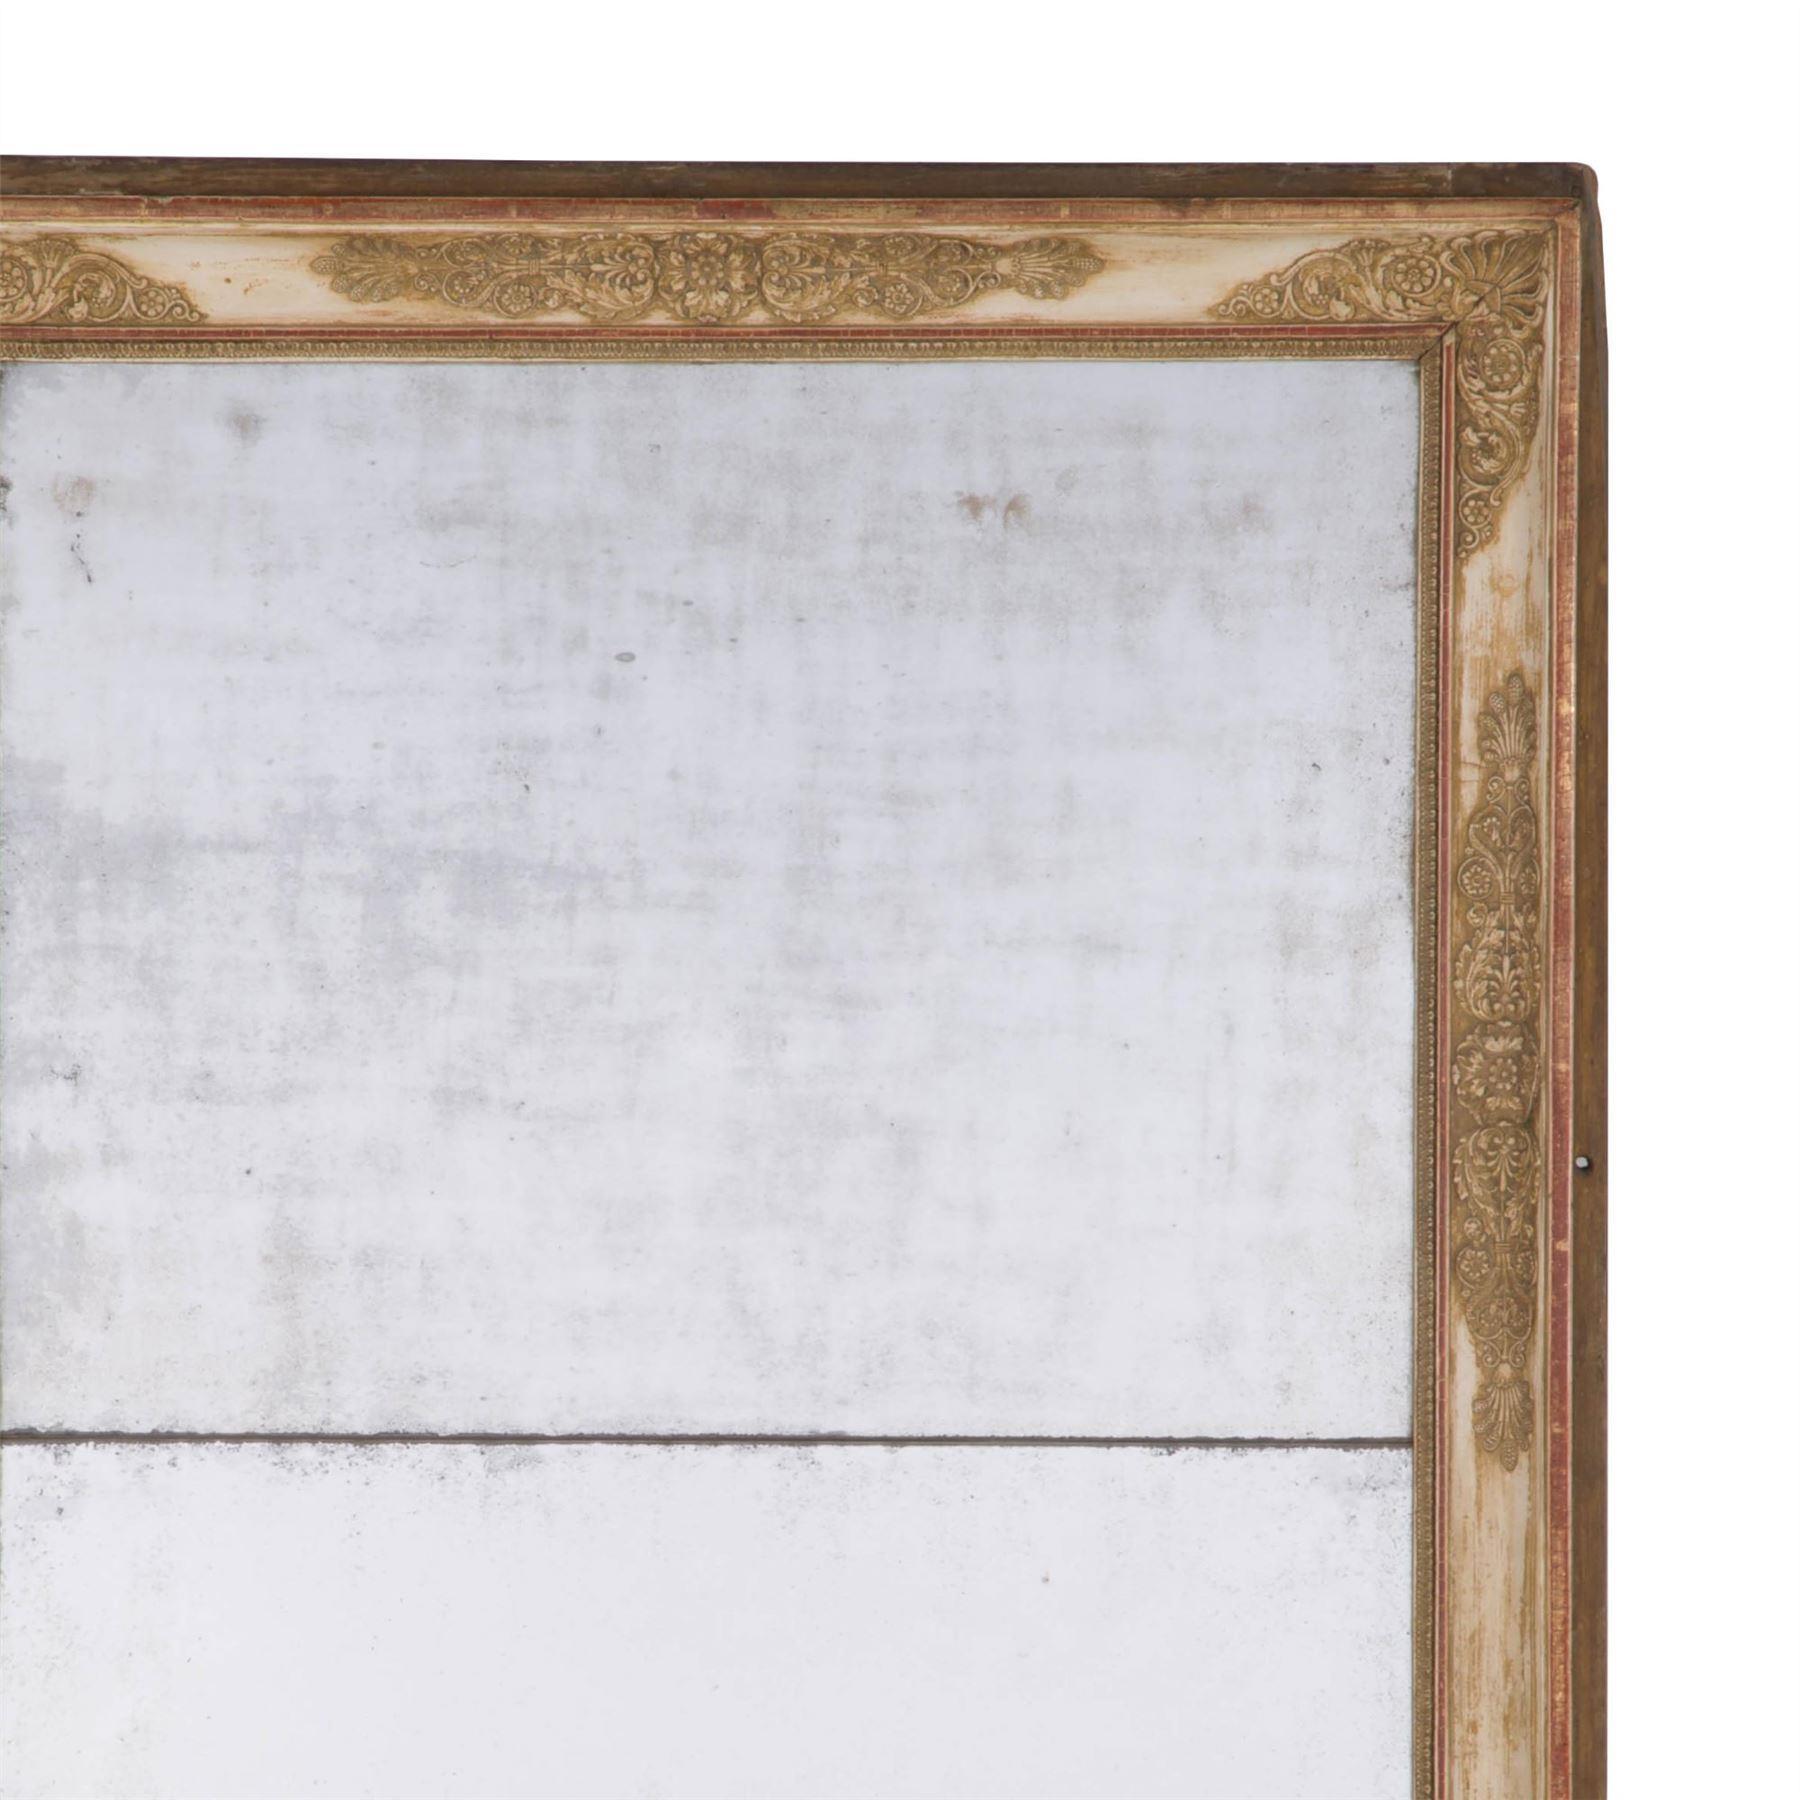 19th century French Empire mirror with original split plate mercury glass, stripped to gesso.